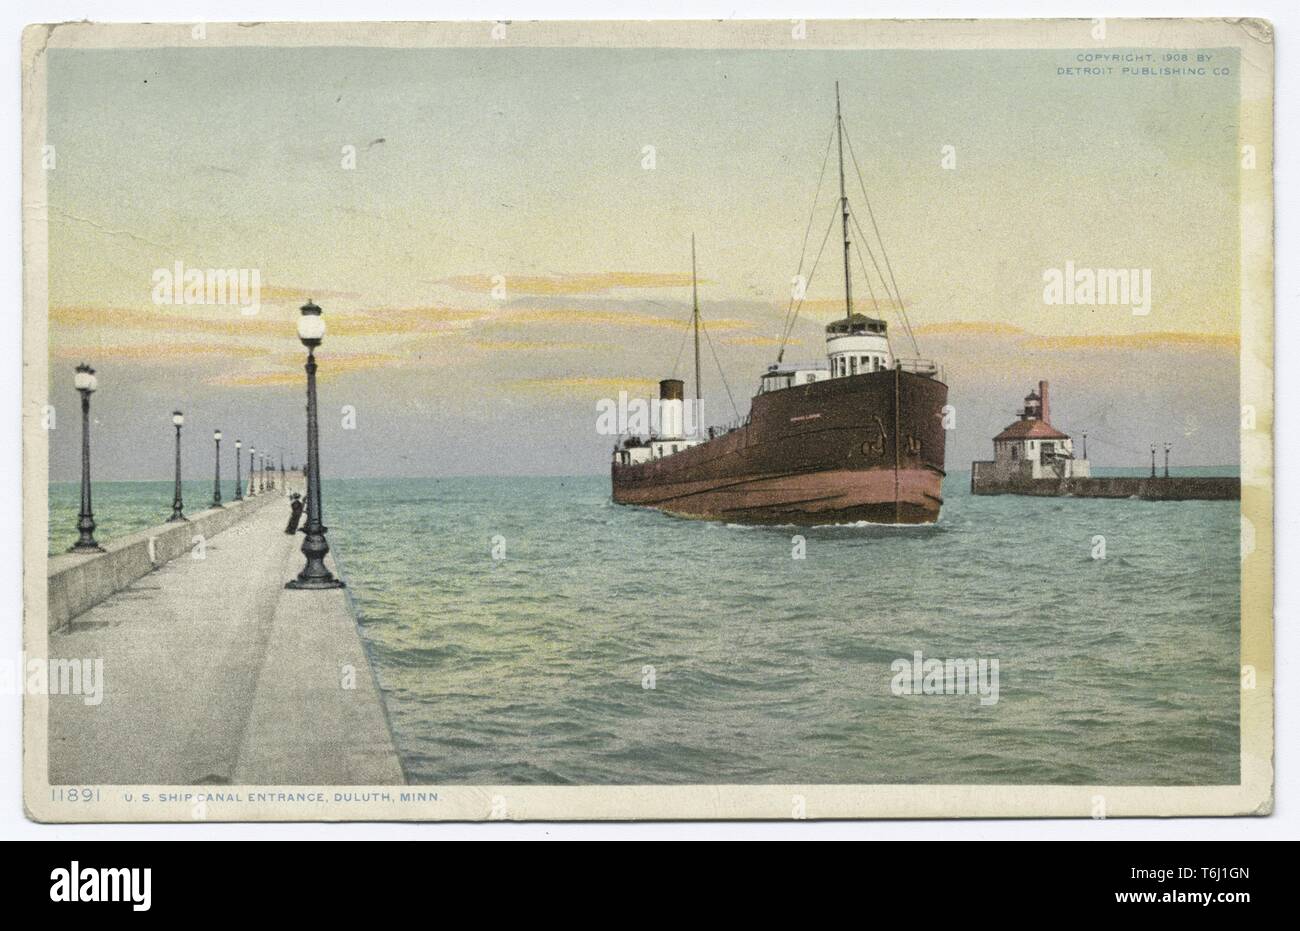 Detroit Publishing Company vintage postcard of United States Ship Canal Entrance, Duluth, Minnesota, 1908. From the New York Public Library. () Stock Photo